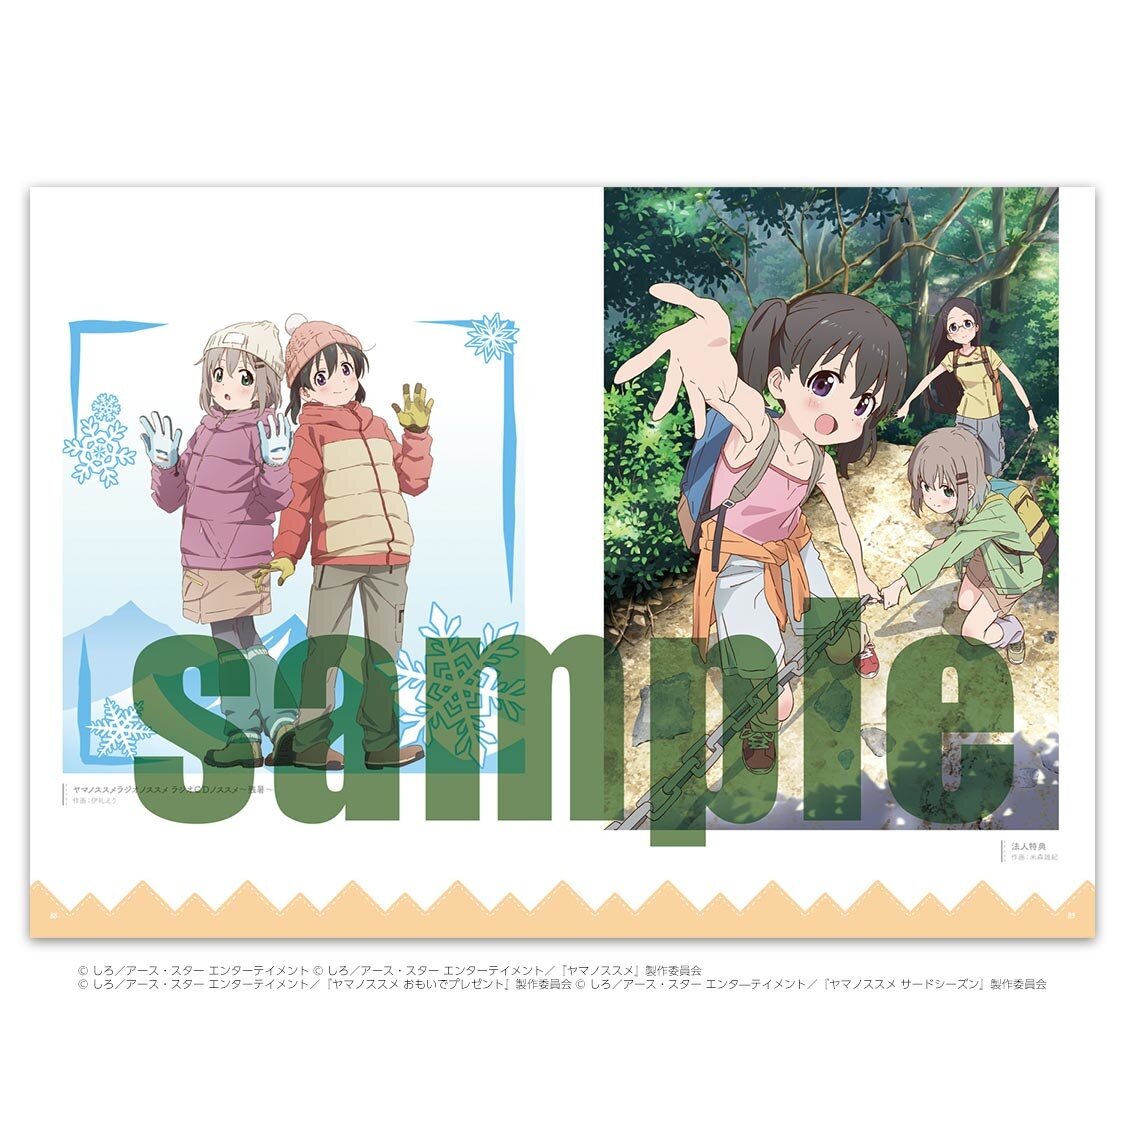 Characters appearing in Encouragement of Climb: Omoide Present Anime